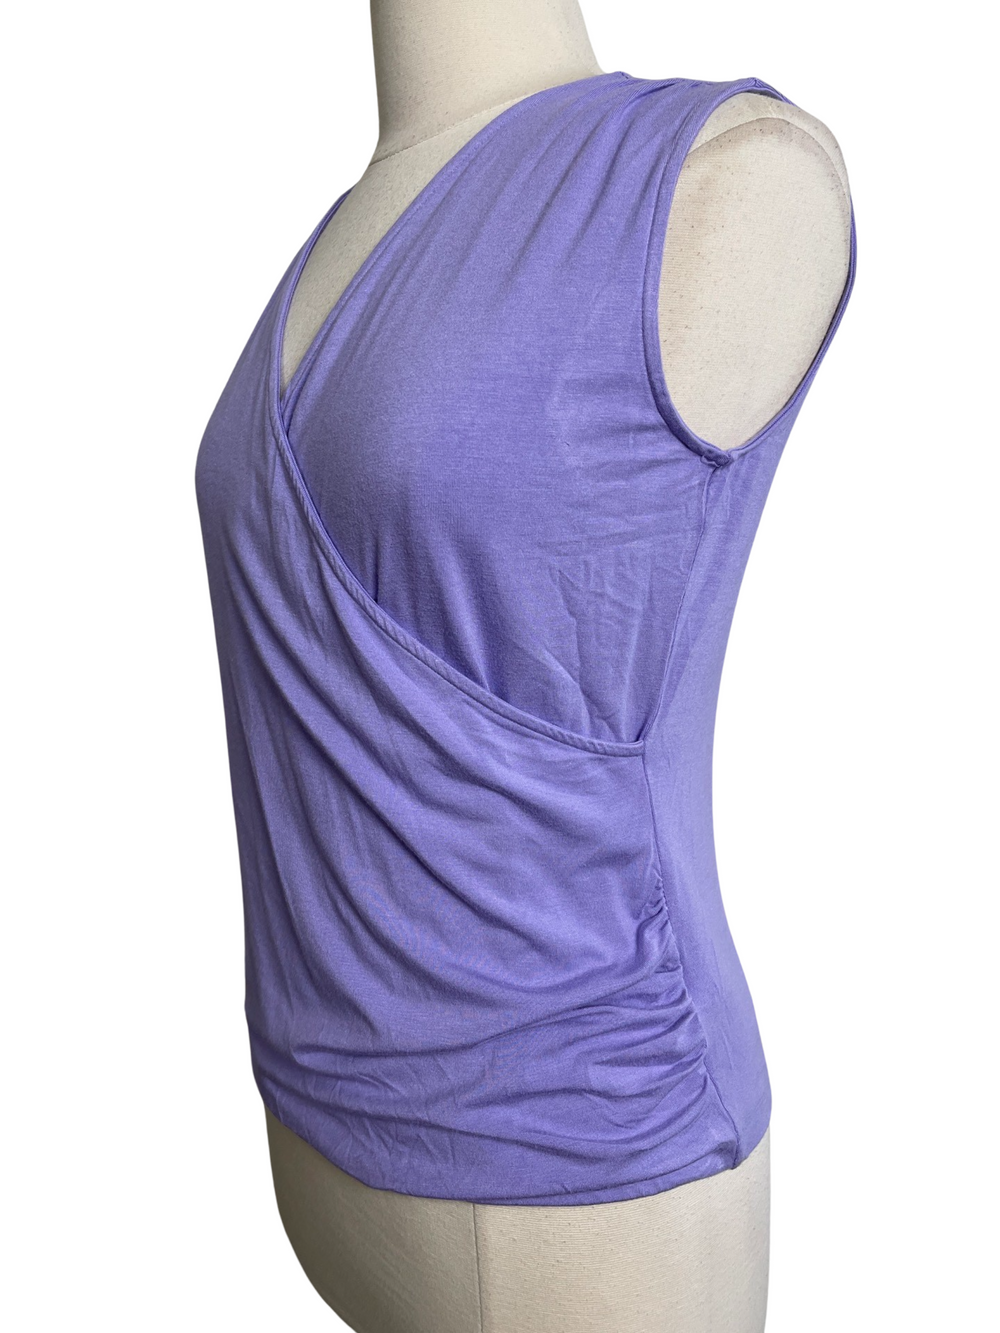 Swing Control Knit Jersey Sleeveless Top - Violet - Small - Skorzie